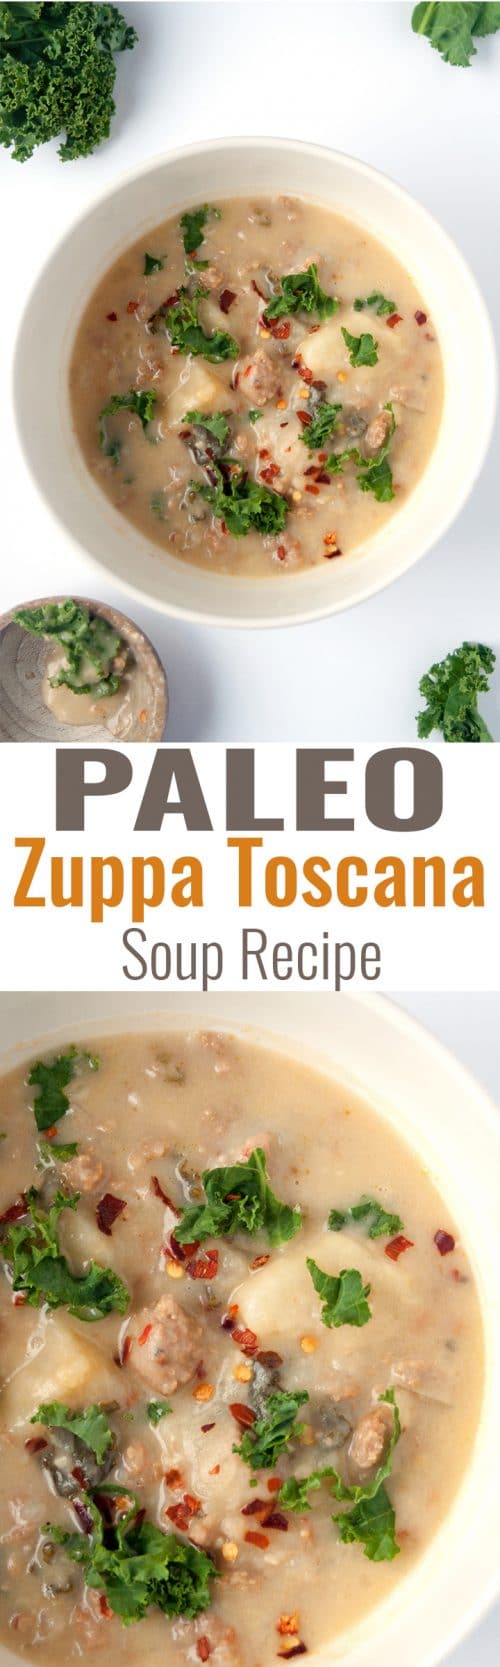 Paleo Zuppa Toscana Soup - an easy and simple paleo twist on a classic soup recipe. It's so creamy and delicious! Perfect for chilly winter nights. | thebewitchinkitchen.com